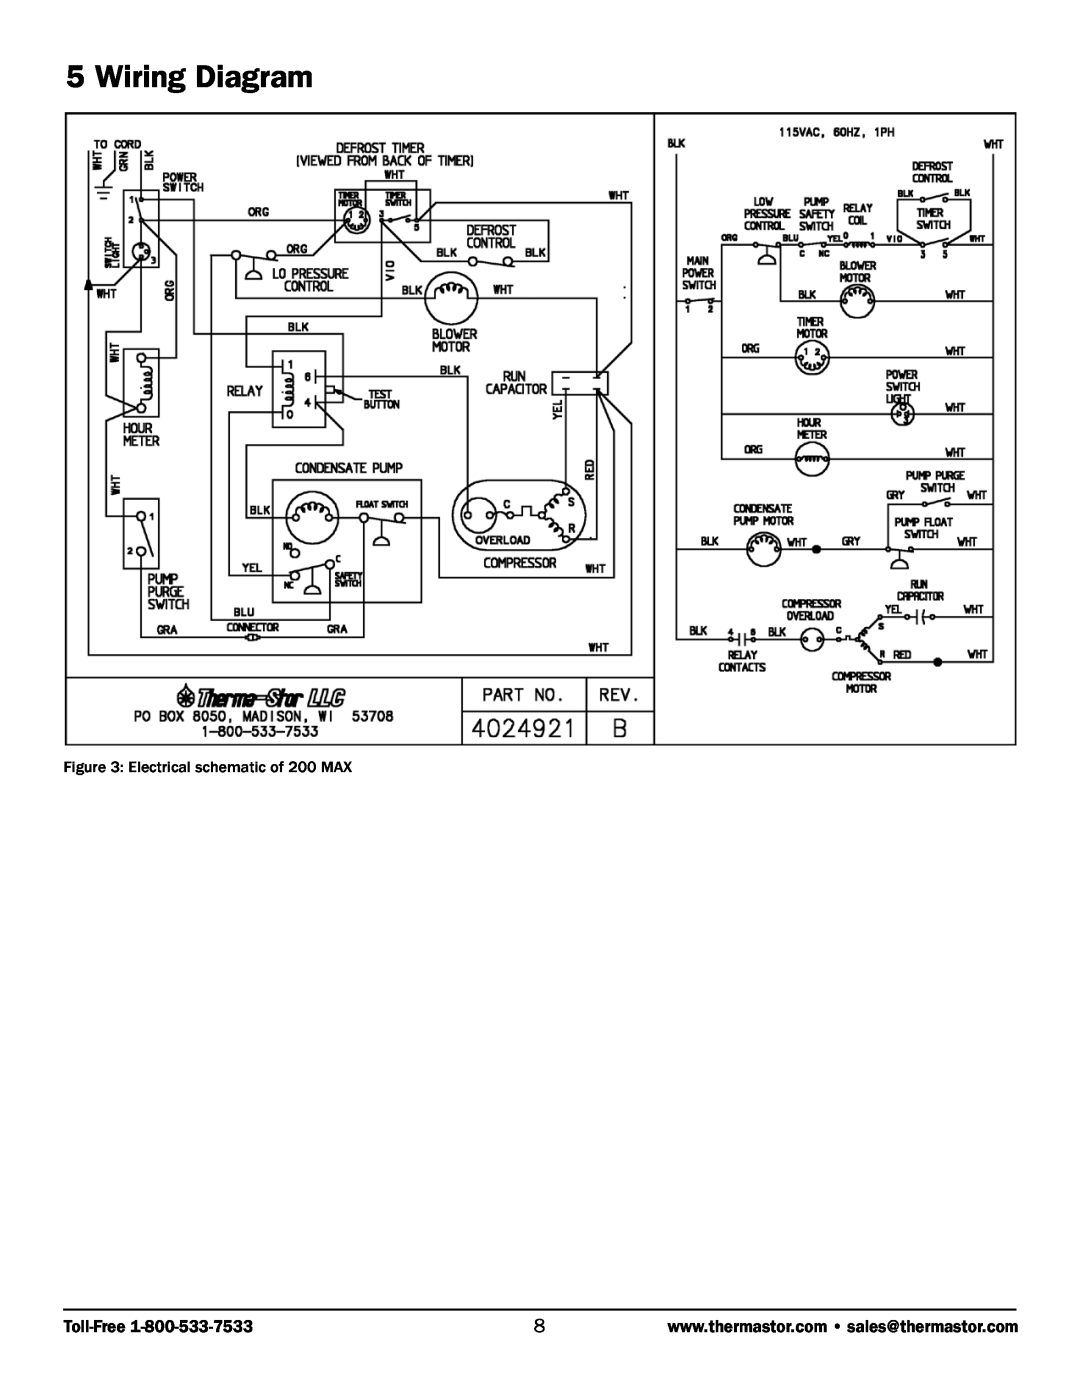 Therma-Stor Products Group owner manual Wiring Diagram, Electrical schematic of 200 MAX 